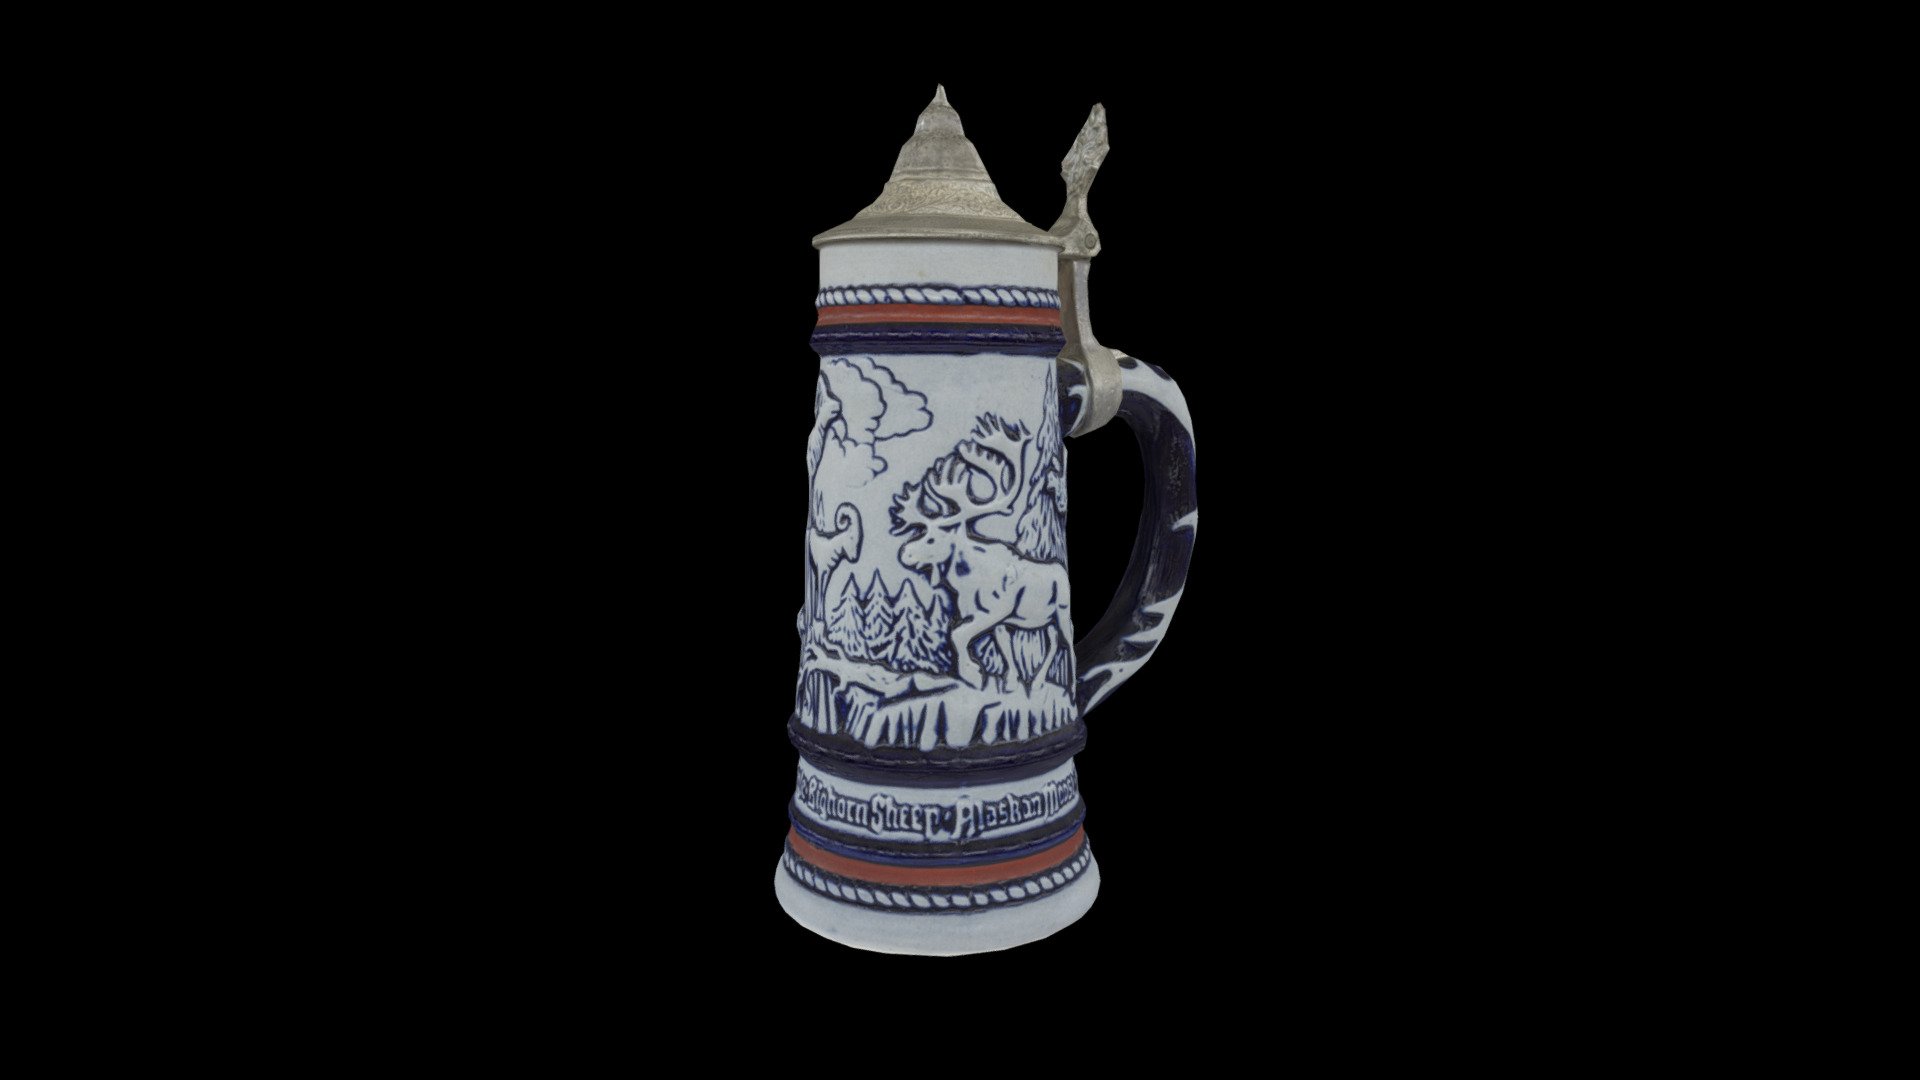 1976 Avon Ceramic Stein given to me by my Grandparents.

Created with the turntable photogrammetry and postprocessing workflow seen here: https://youtu.be/occG-5goNCQ - 1976 Avon Ceramic Stein - Download Free 3D model by Matthew Brennan (@matthewbrennan) 3d model